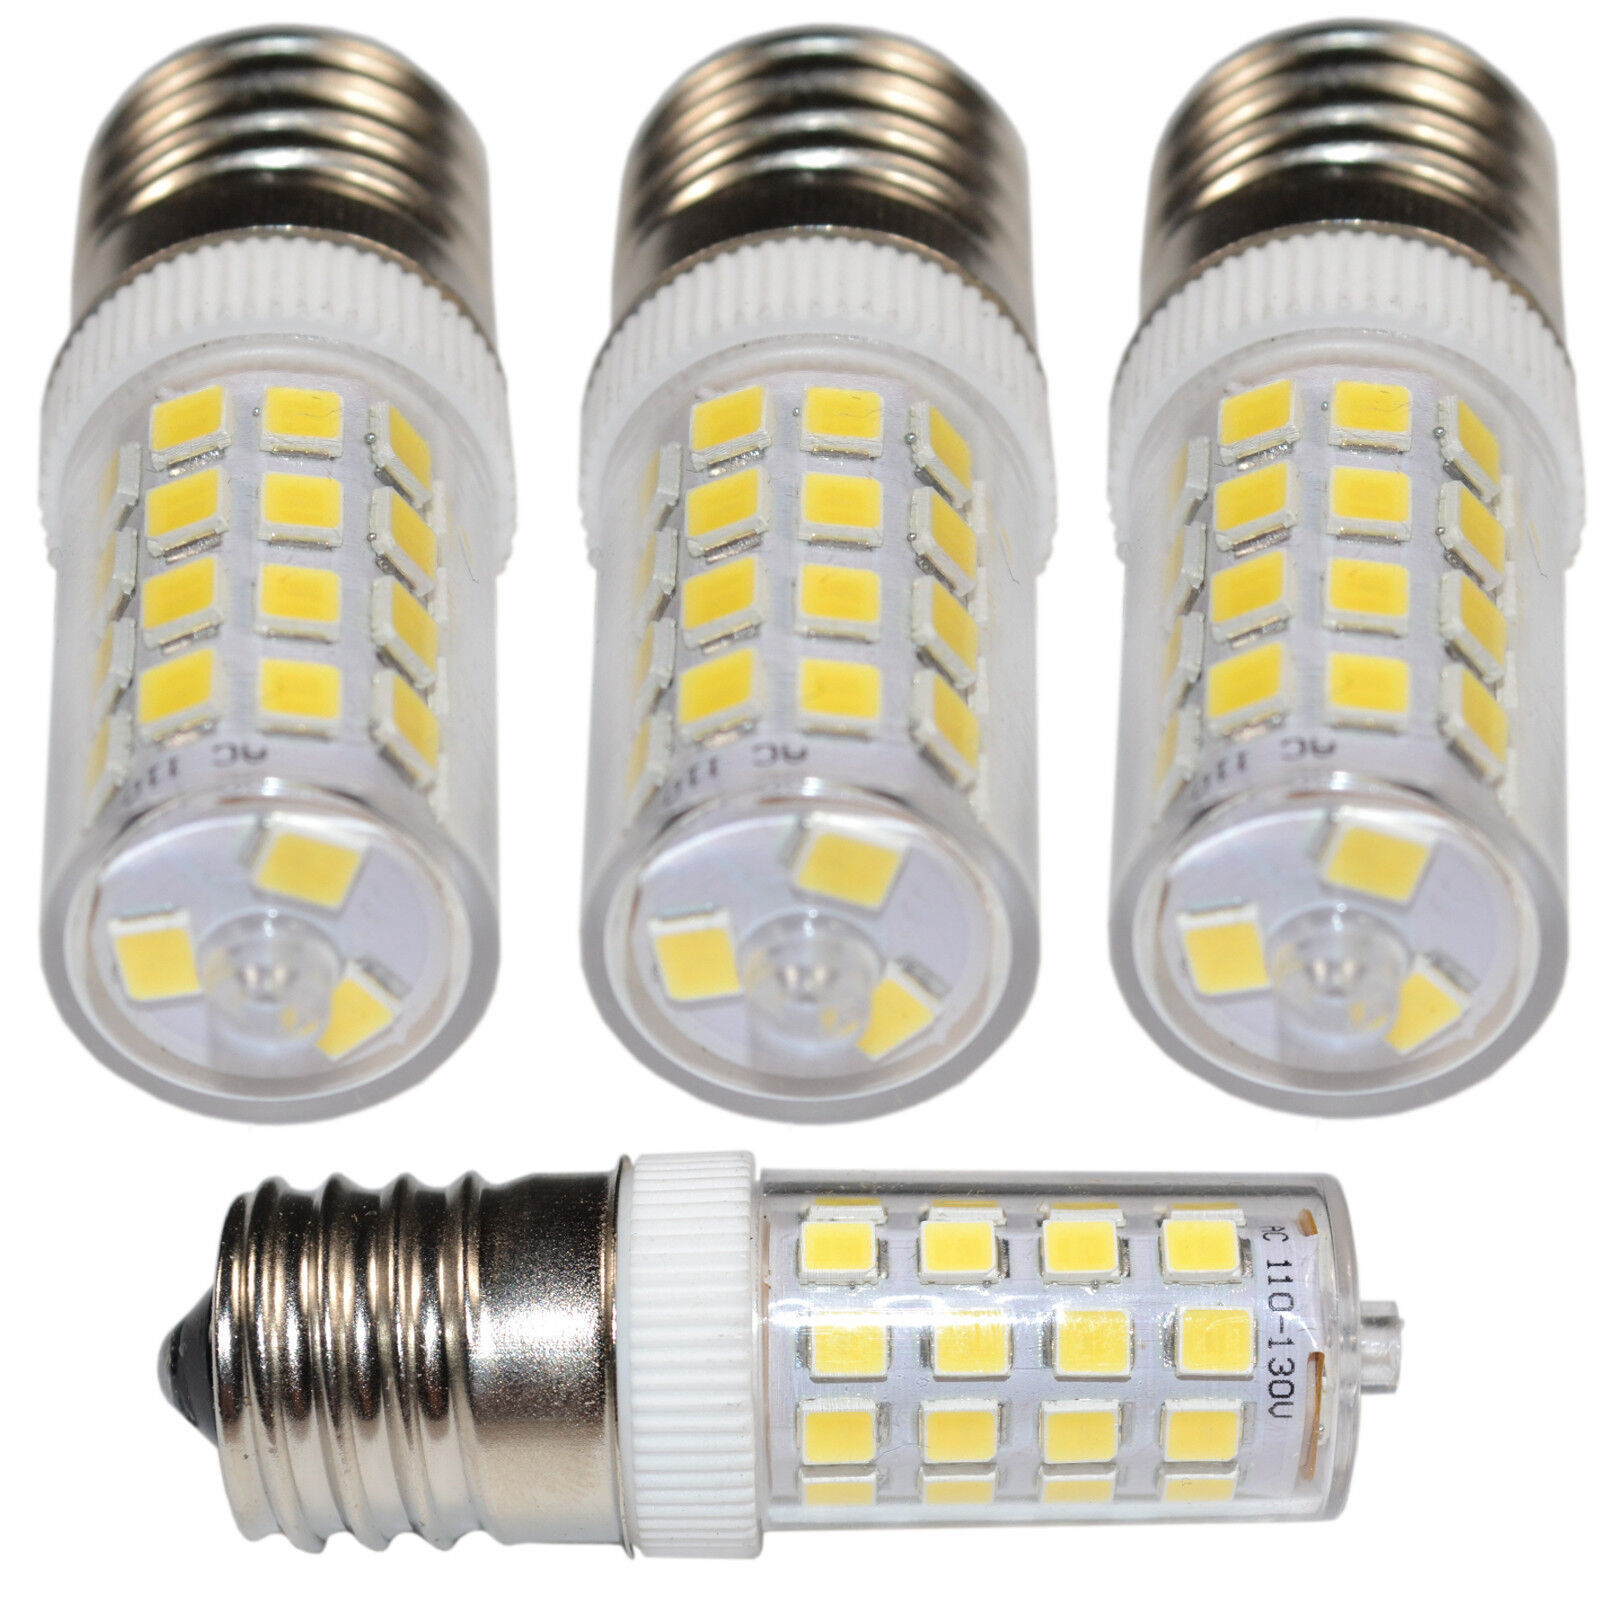 4-Pack 110V E17 Dimmable LED Light Bulb Cool White for GE WB36X10003 Replacement - $62.99